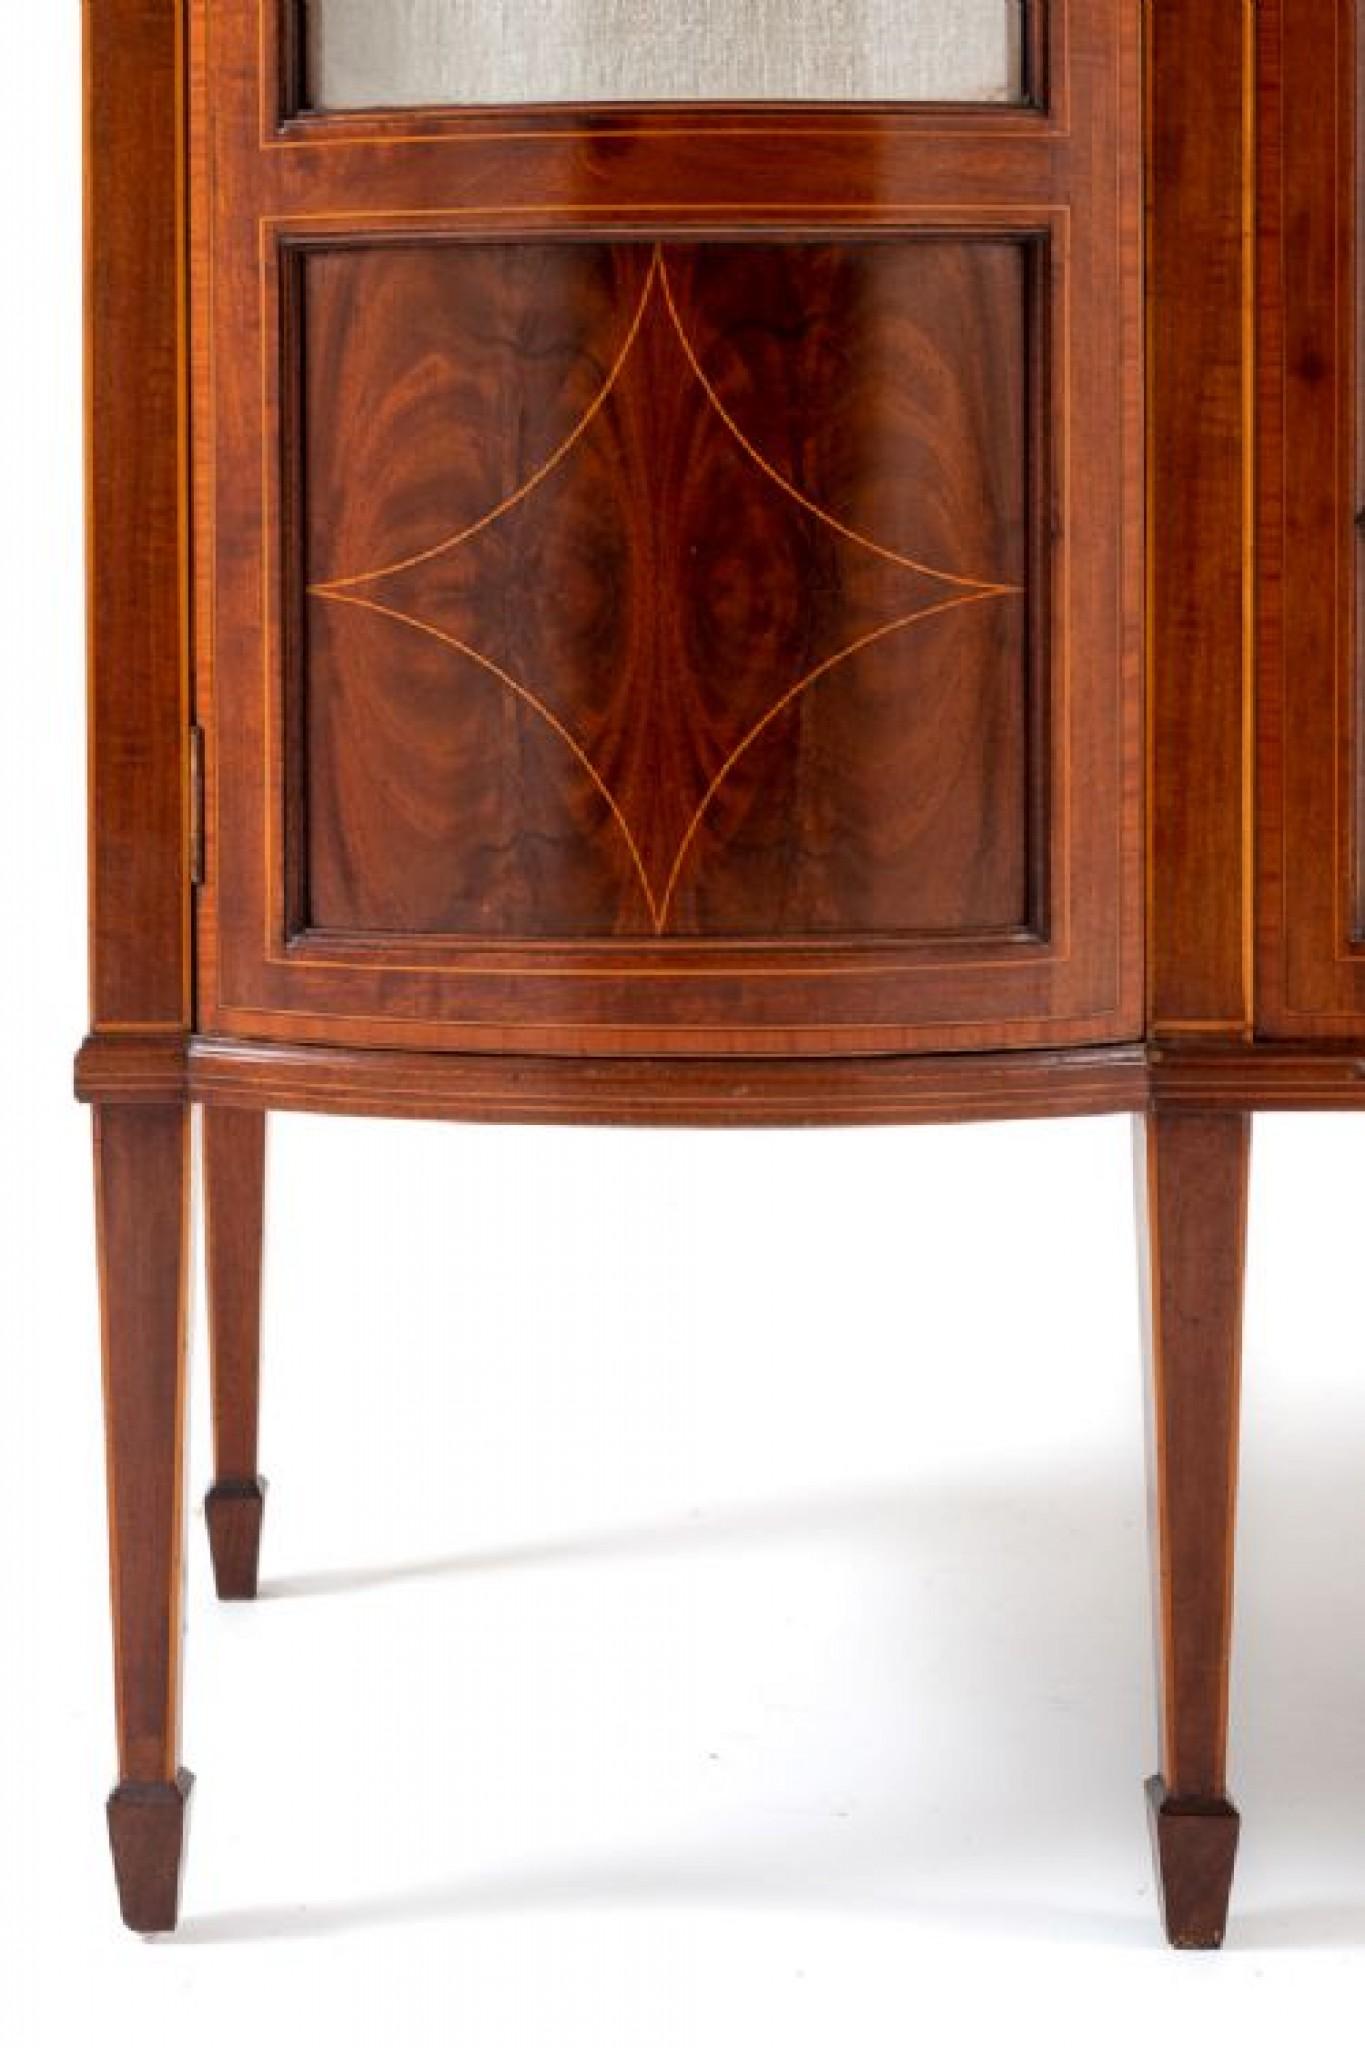 Sheraton Revival Mahogany display cabinet.
This Pretty Display Cabinet Stands Upon Square Tapered Legs With Spade feet.
circa 1890
Having an Astragal Glazed Central Door Flanked By Bow doors With Inlaid Panels.
The Tops of The Doors Having